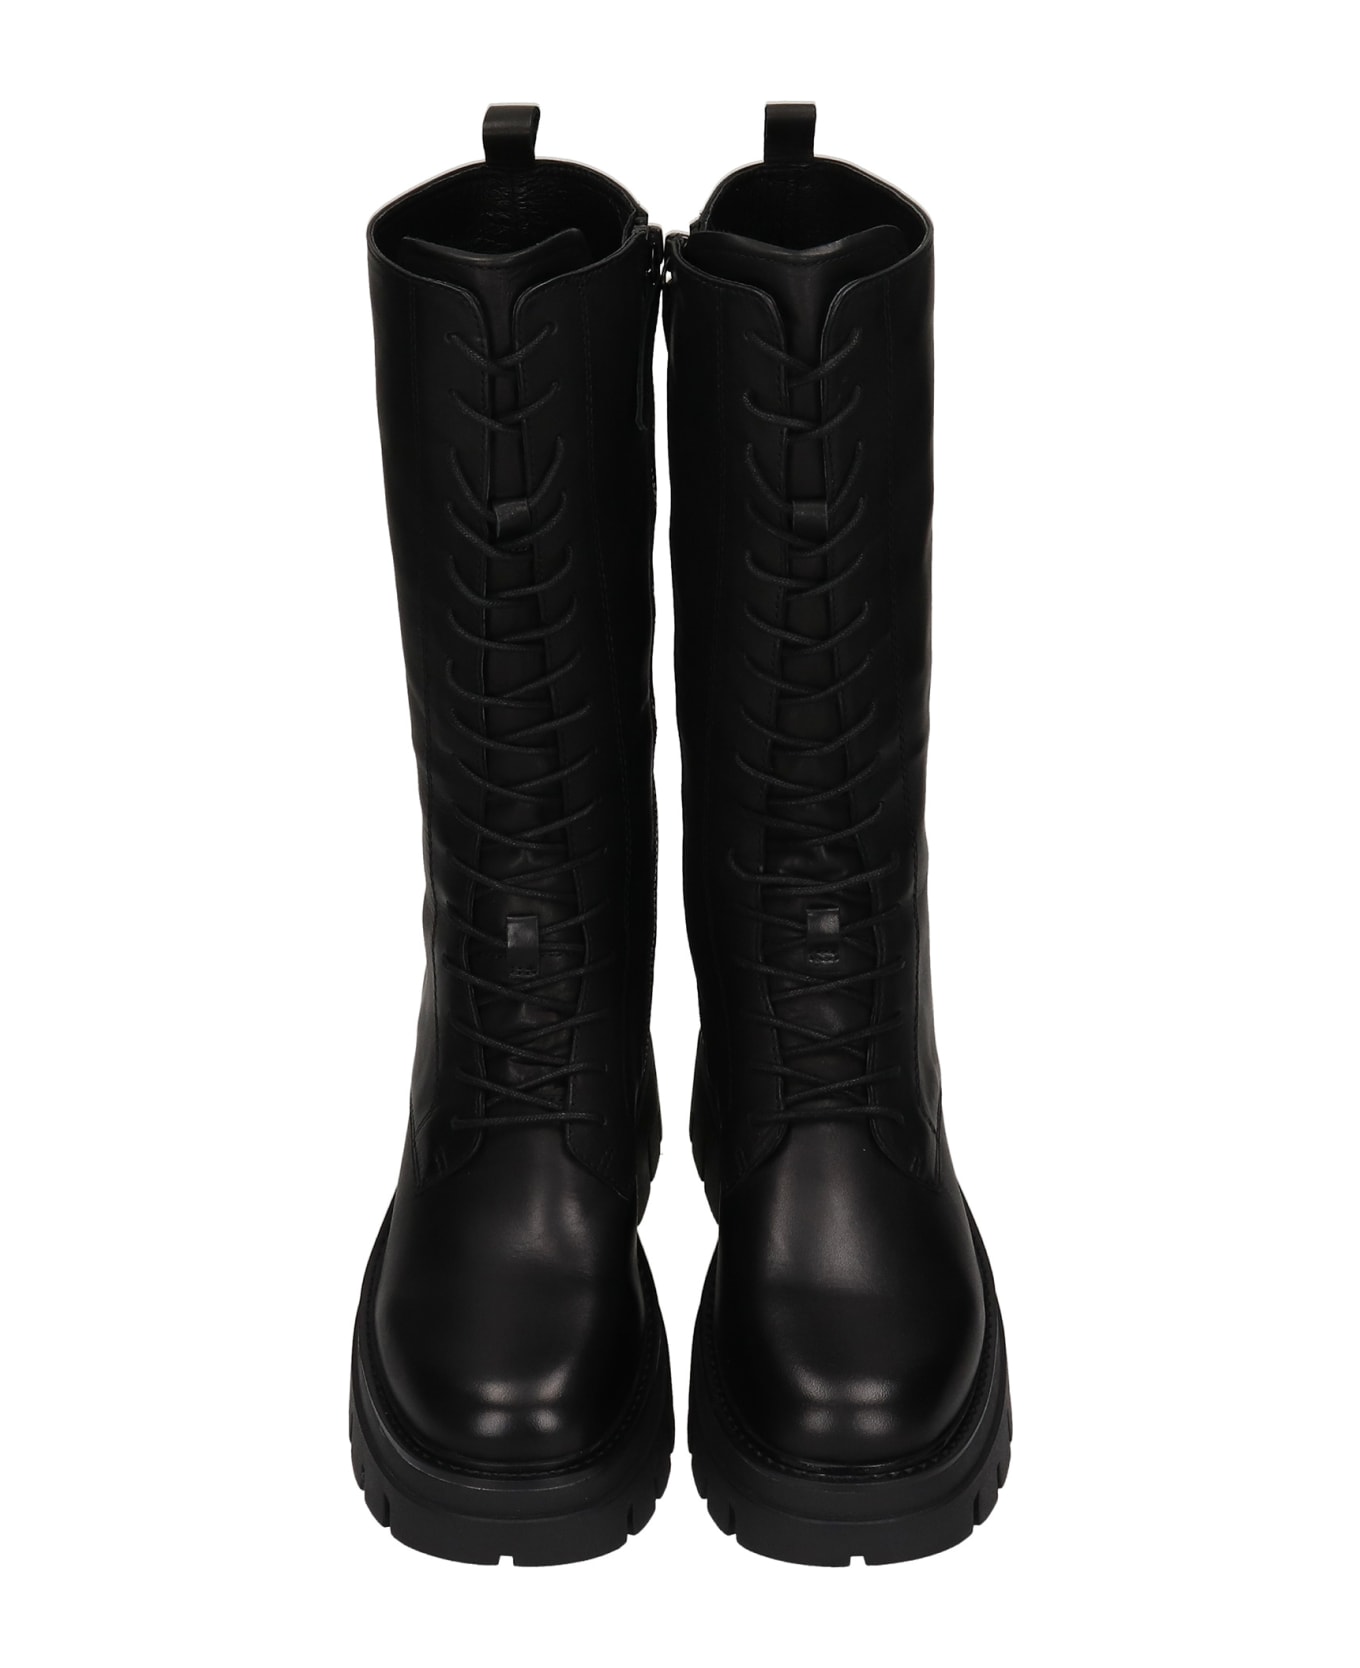 Ash Lullaby Combat Boots In Black Leather - Nero